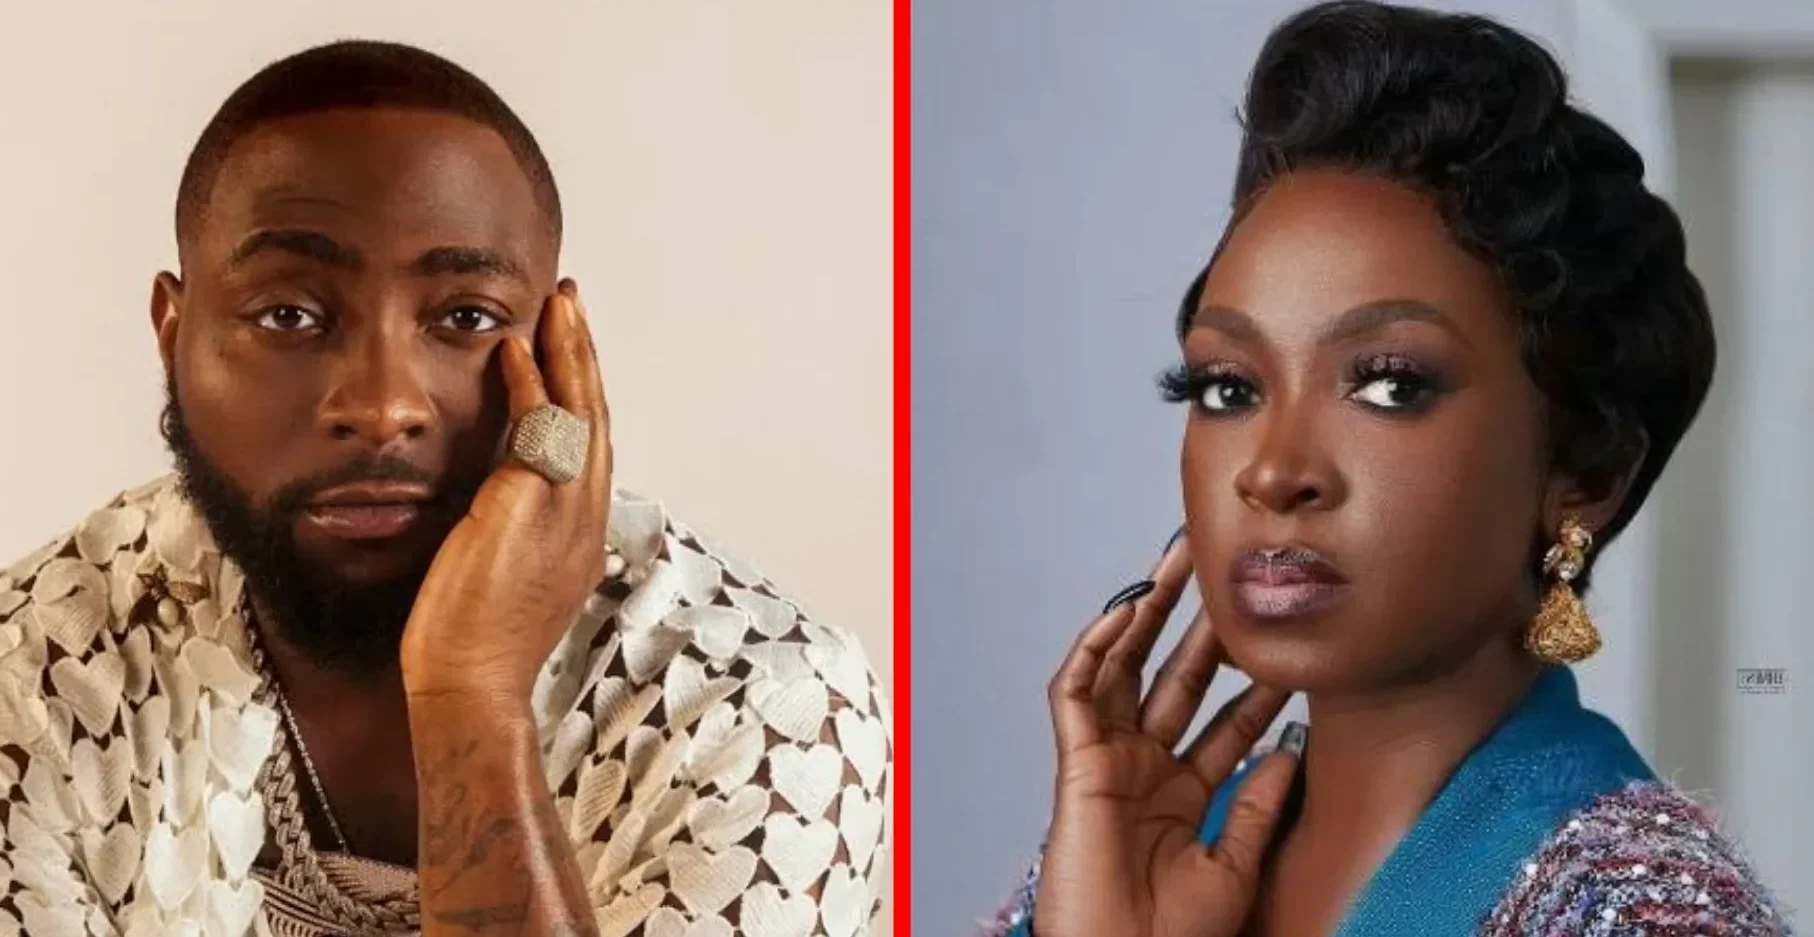 Reactions Trail As Kate Henshaw Shares Why She Is Not A Fan Of Davido 1